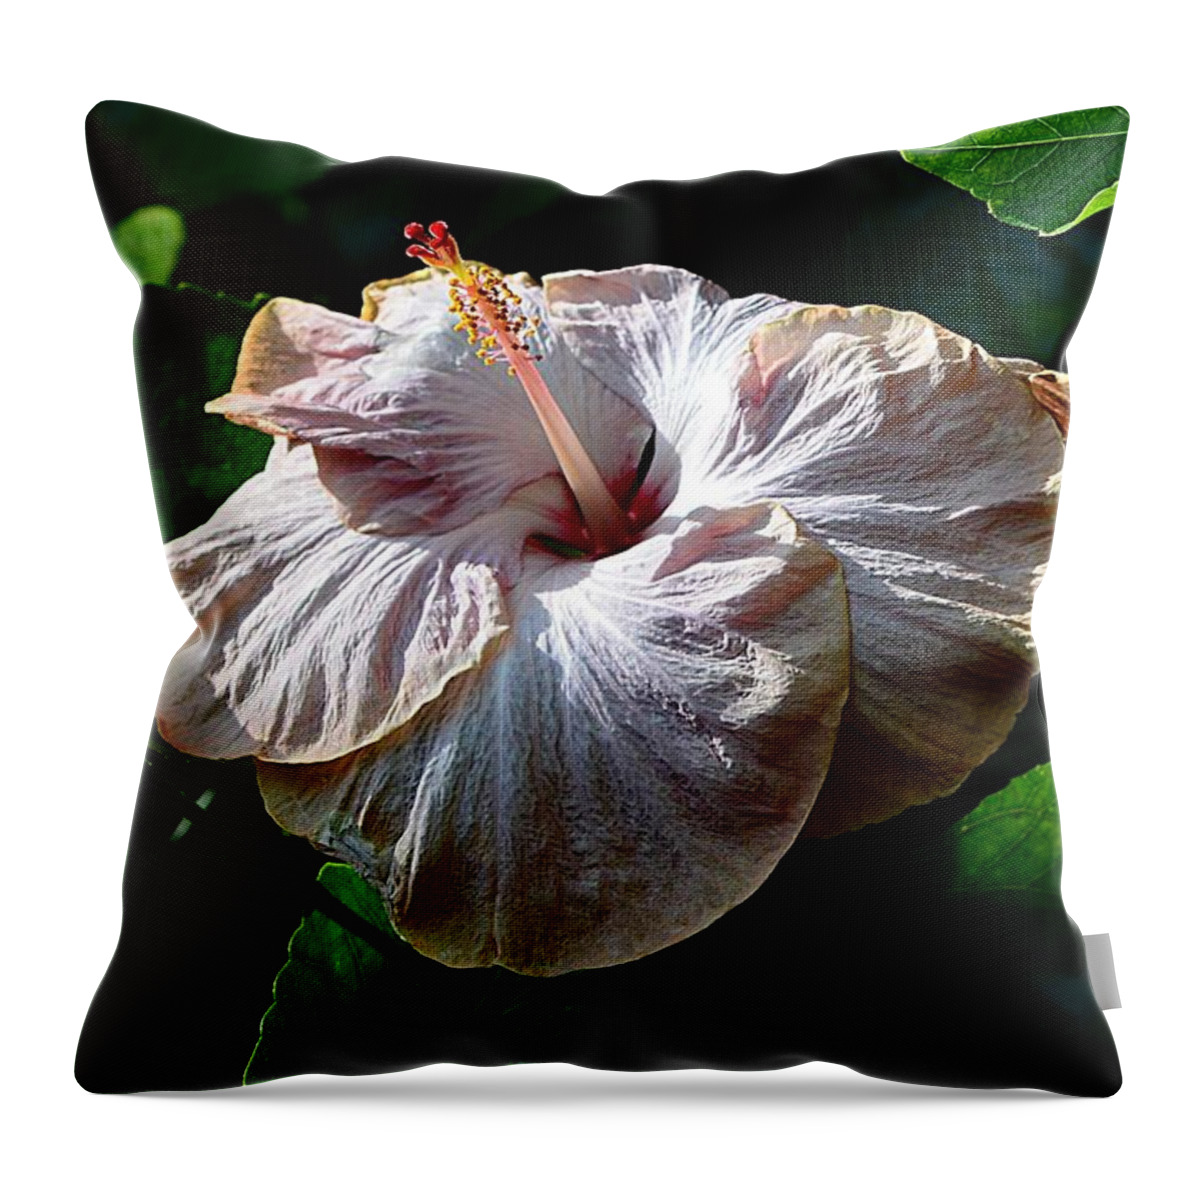 Flowers Throw Pillow featuring the photograph Highlighted Hibiscus by Cindy Manero